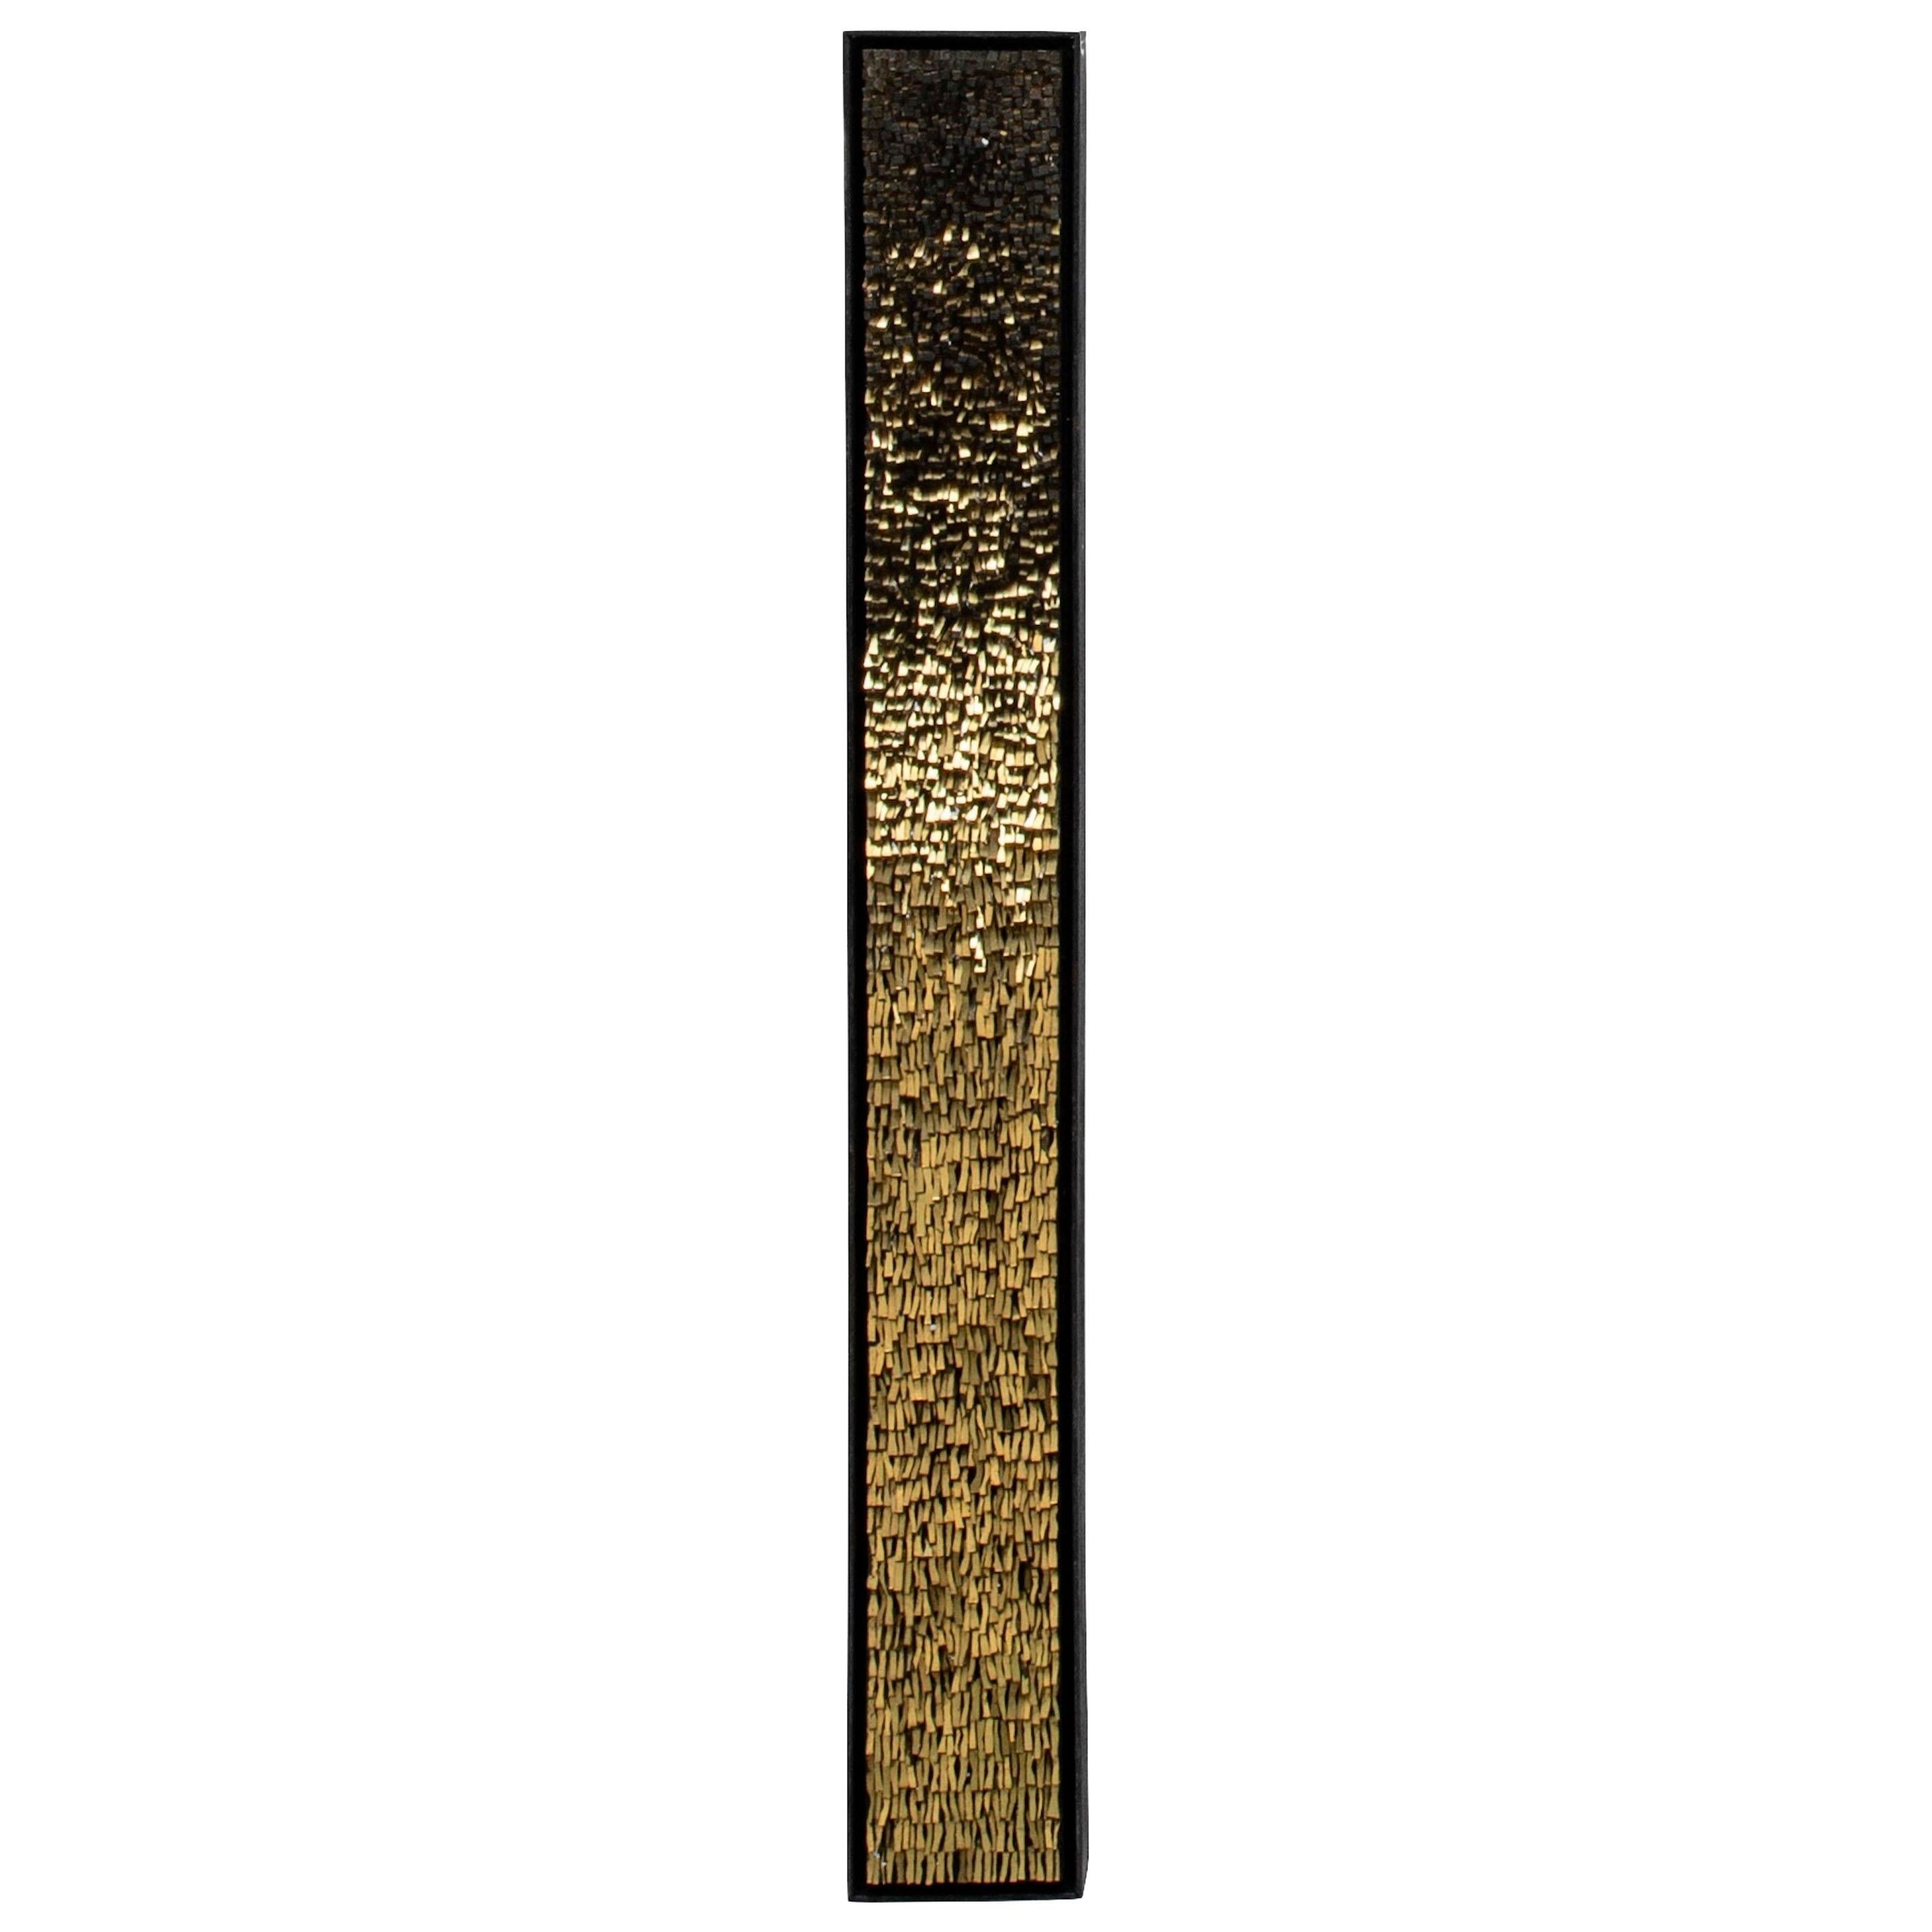 Murano Glass and Gold Leaf Mosaic, Movement Series by Artist Collective CaCO3